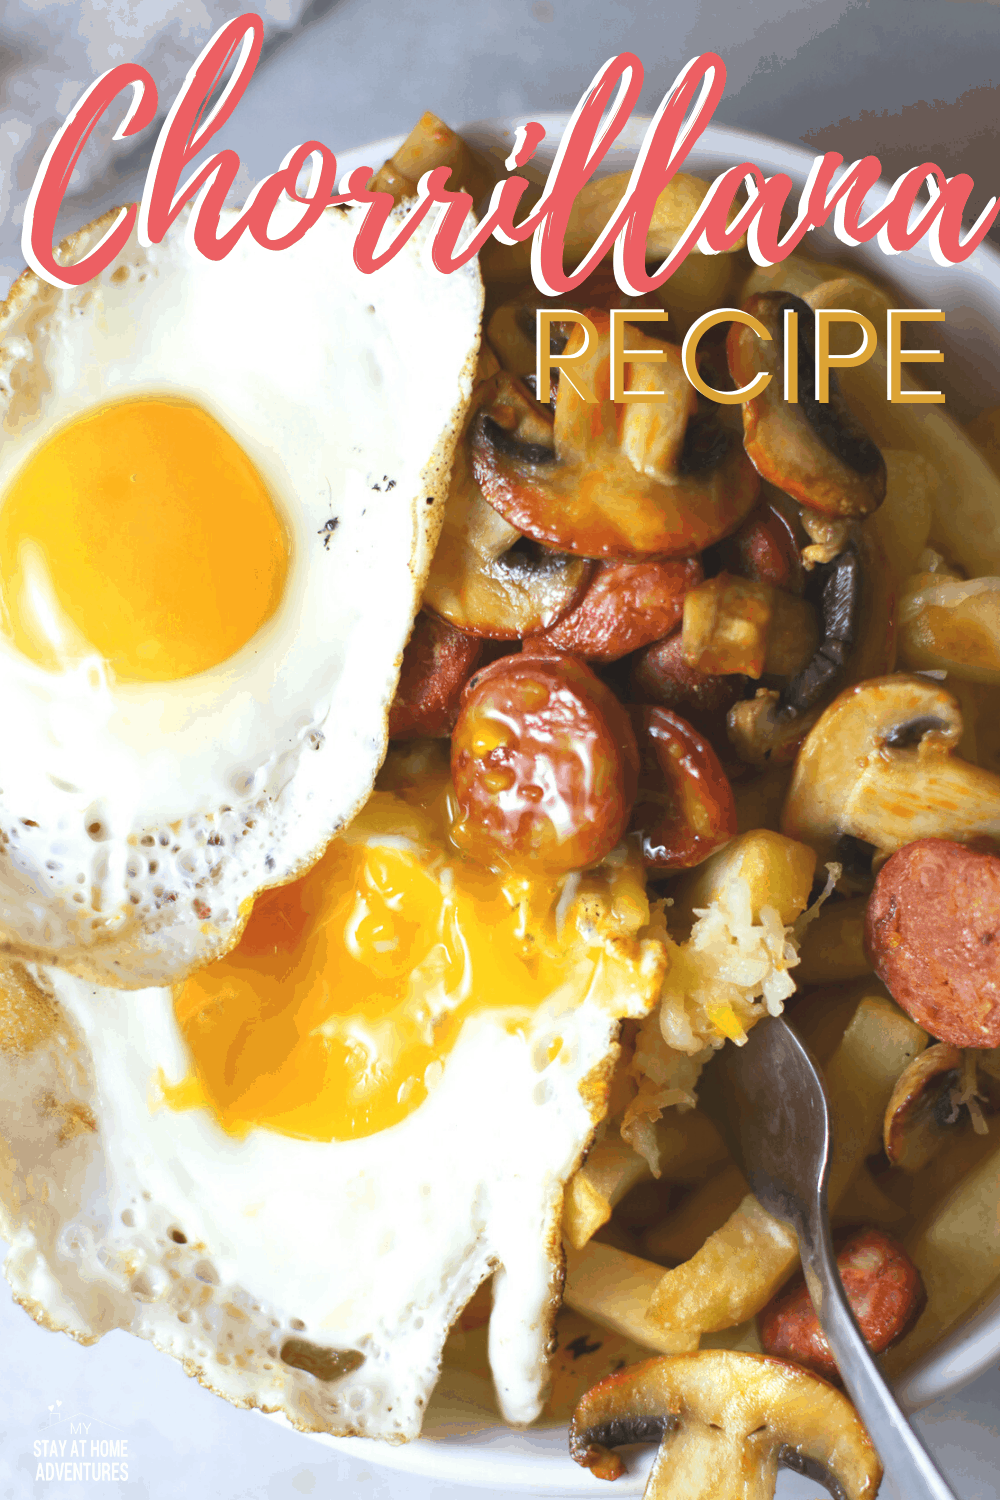 Learn how to create this delicious easy Chorrillana, a famous Chilean dish. Made with fries and topped with mushrooms and chorizo and eggs. #Chileanrecipe #frenchfryrecipe #Chorrillana via @mystayathome